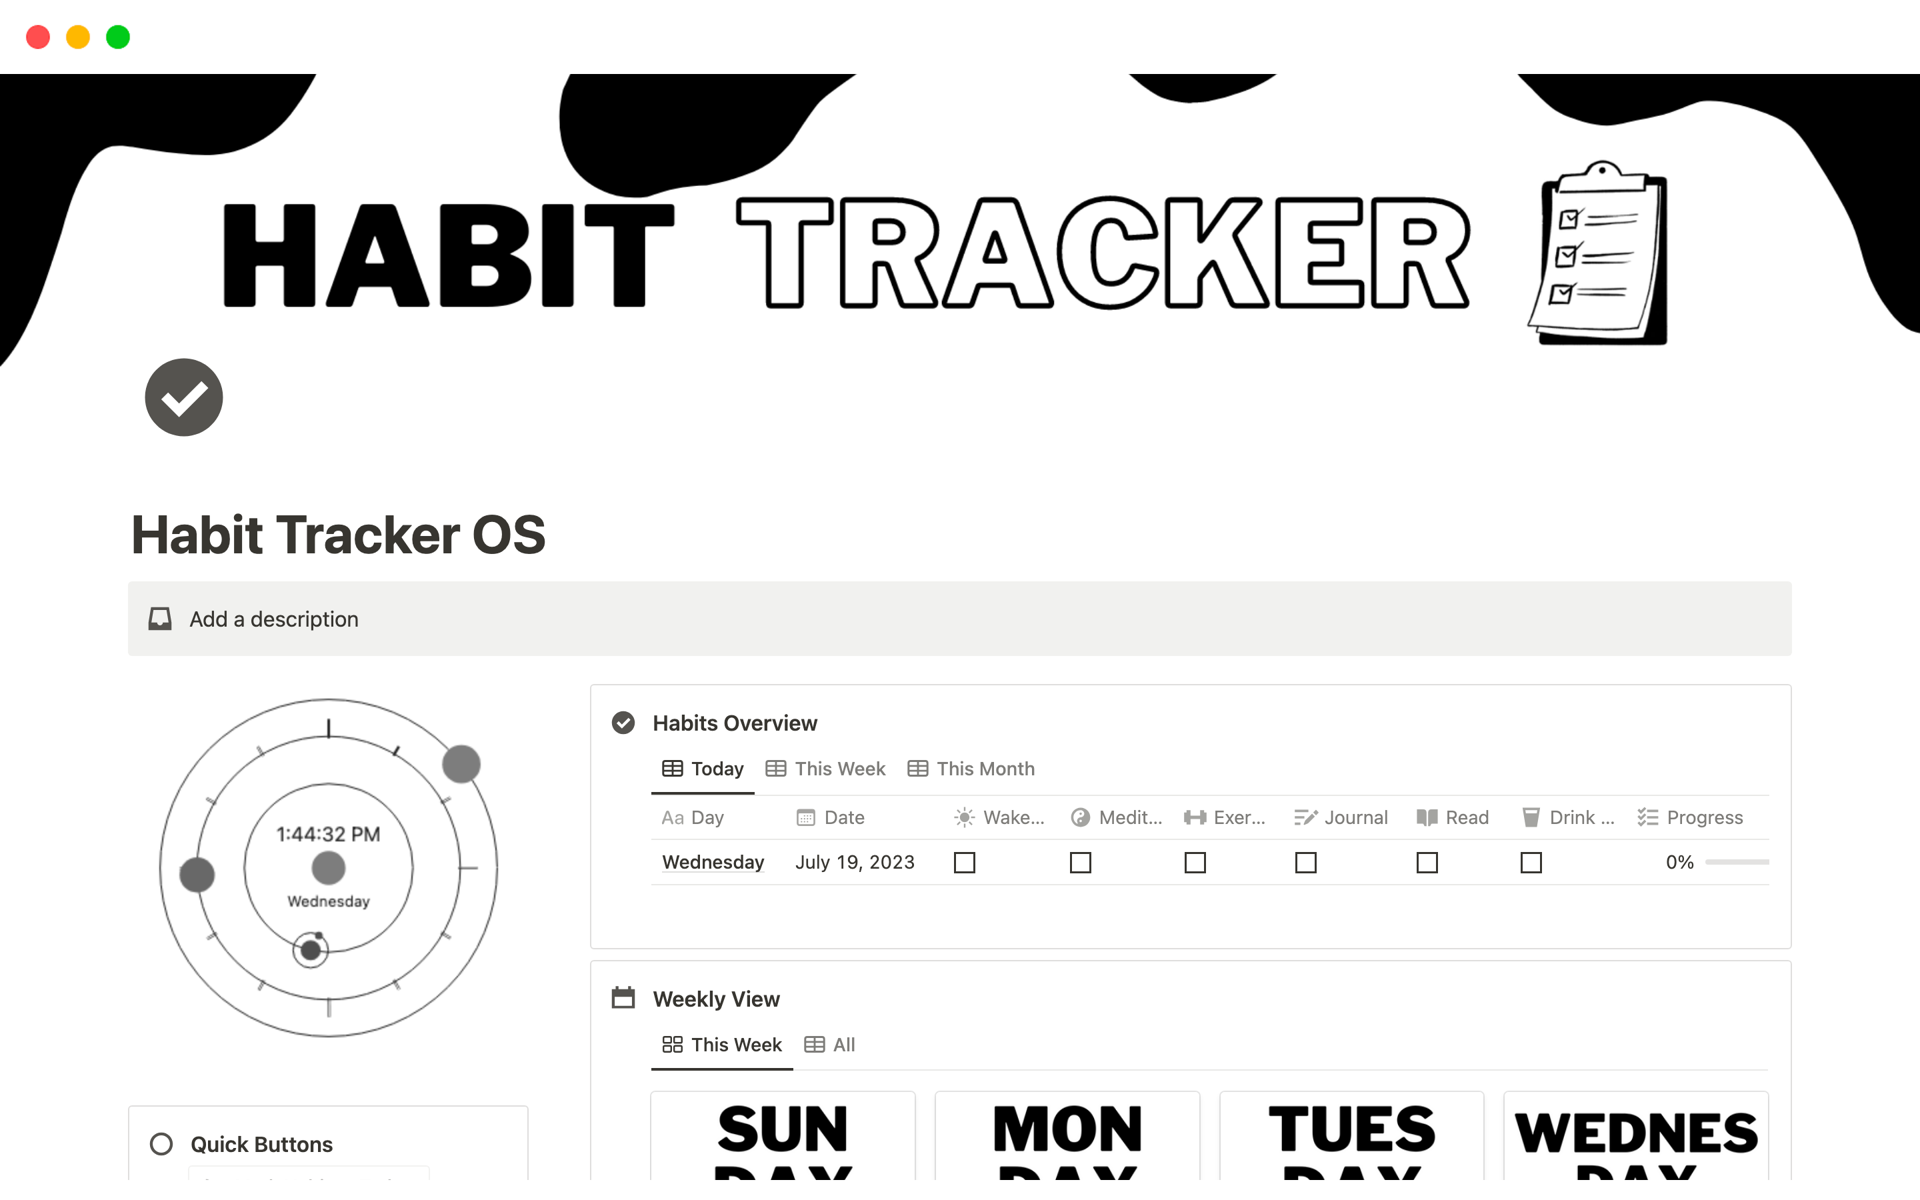 Take control of your habits and start achieving your goals with our Habit Tracker OS.